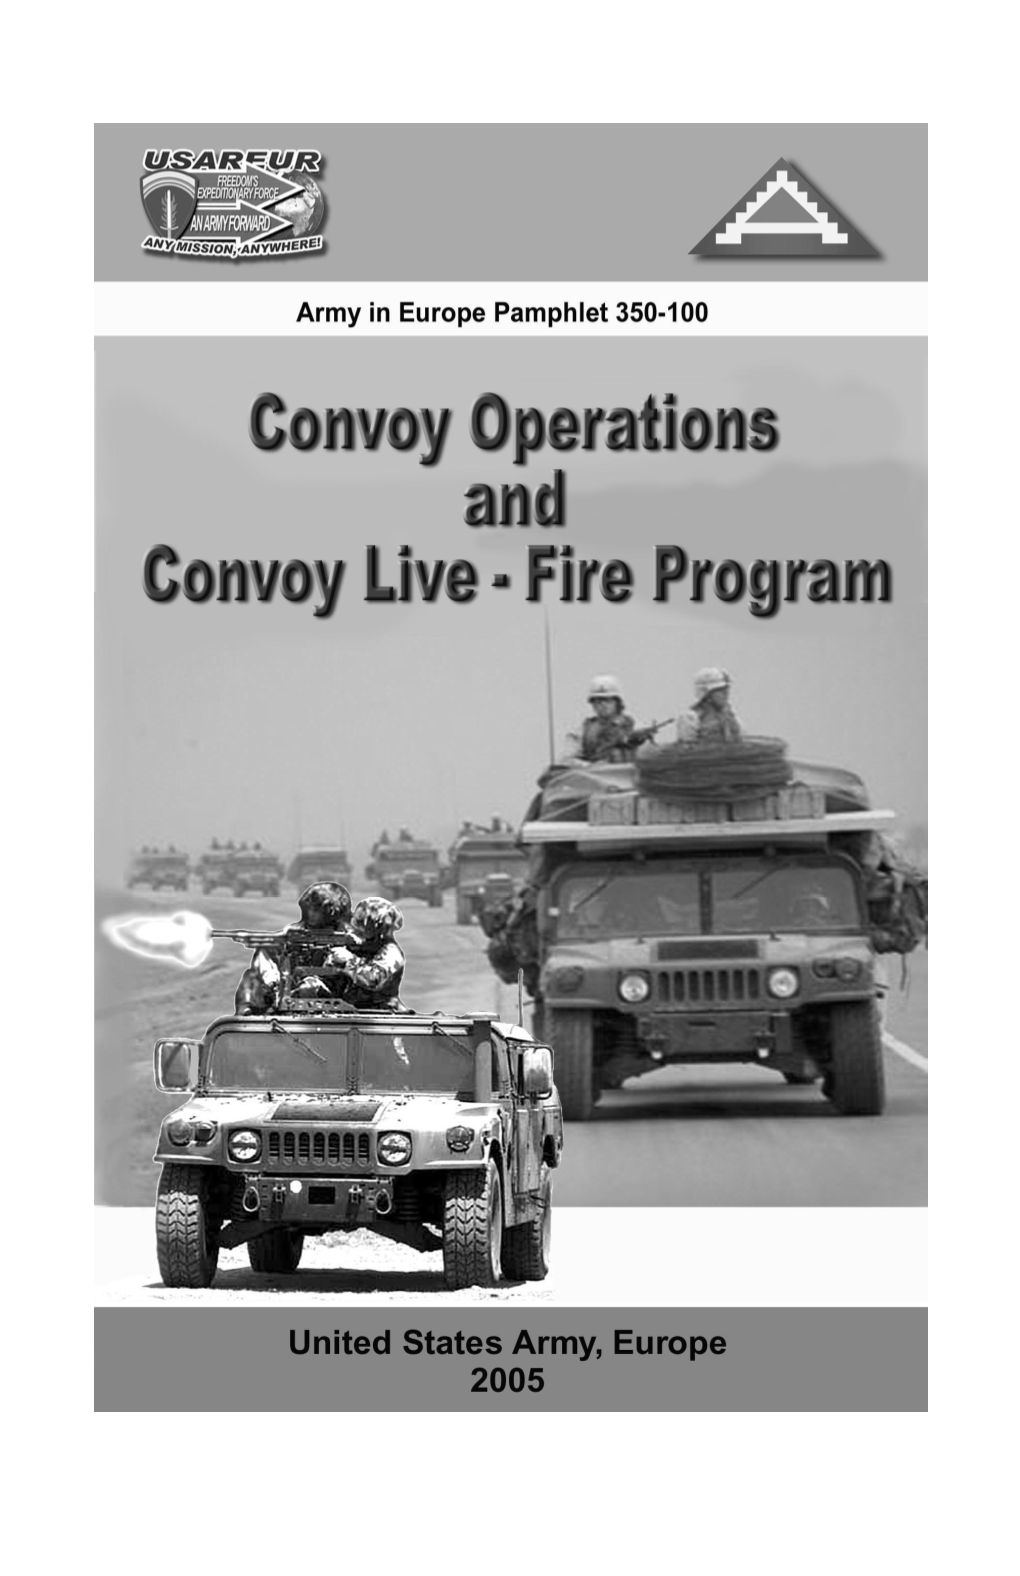 Army in Europe Pamphlet 350-100, 20 June 2005